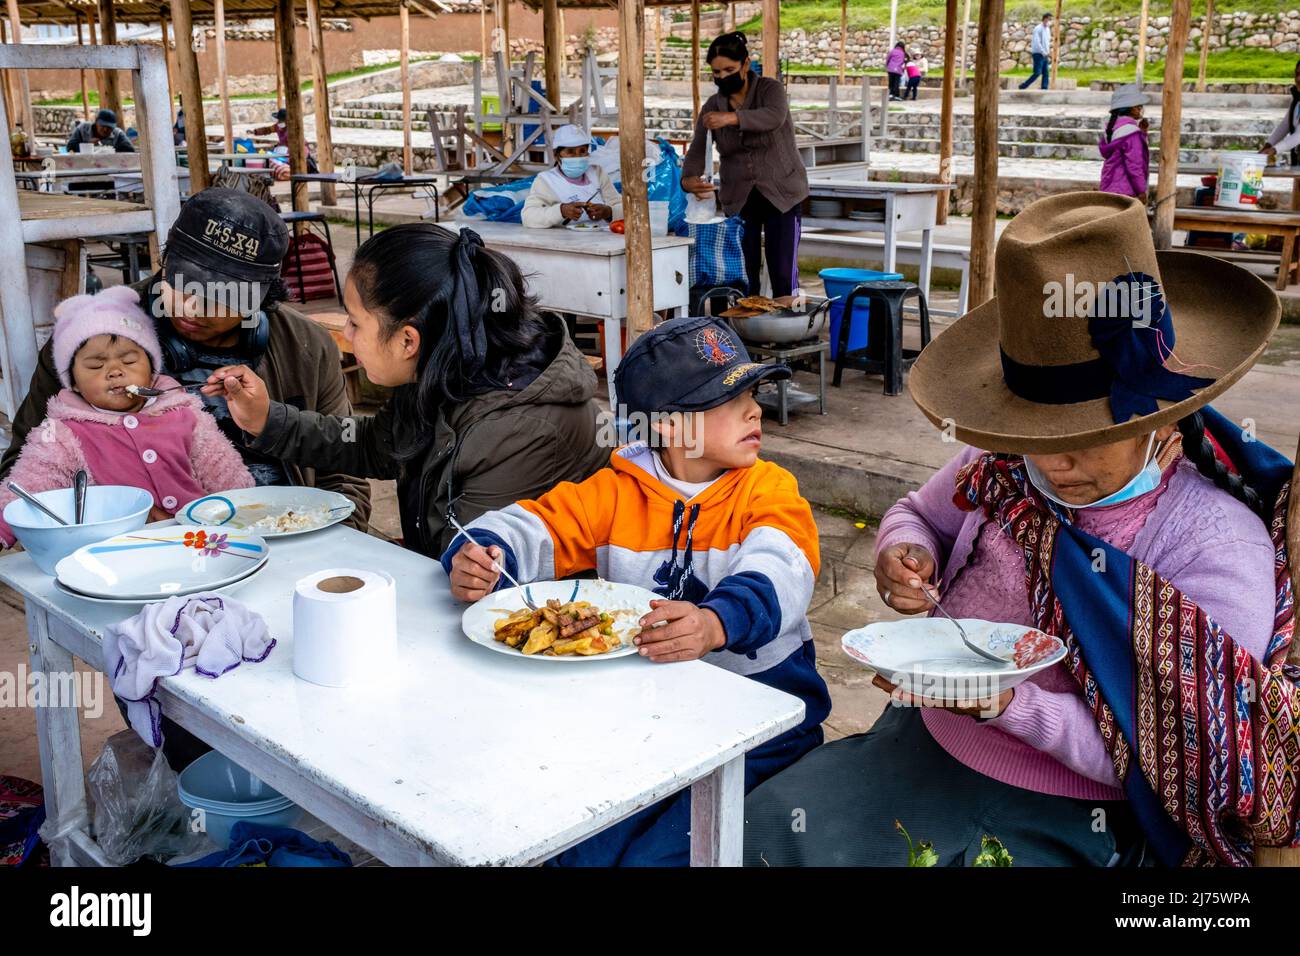 A Peruvian Family Eating A Meal At The Sunday Market In The Village Of Chinchero, The Sacred Valley, Urubamba Province, Peru. Stock Photo